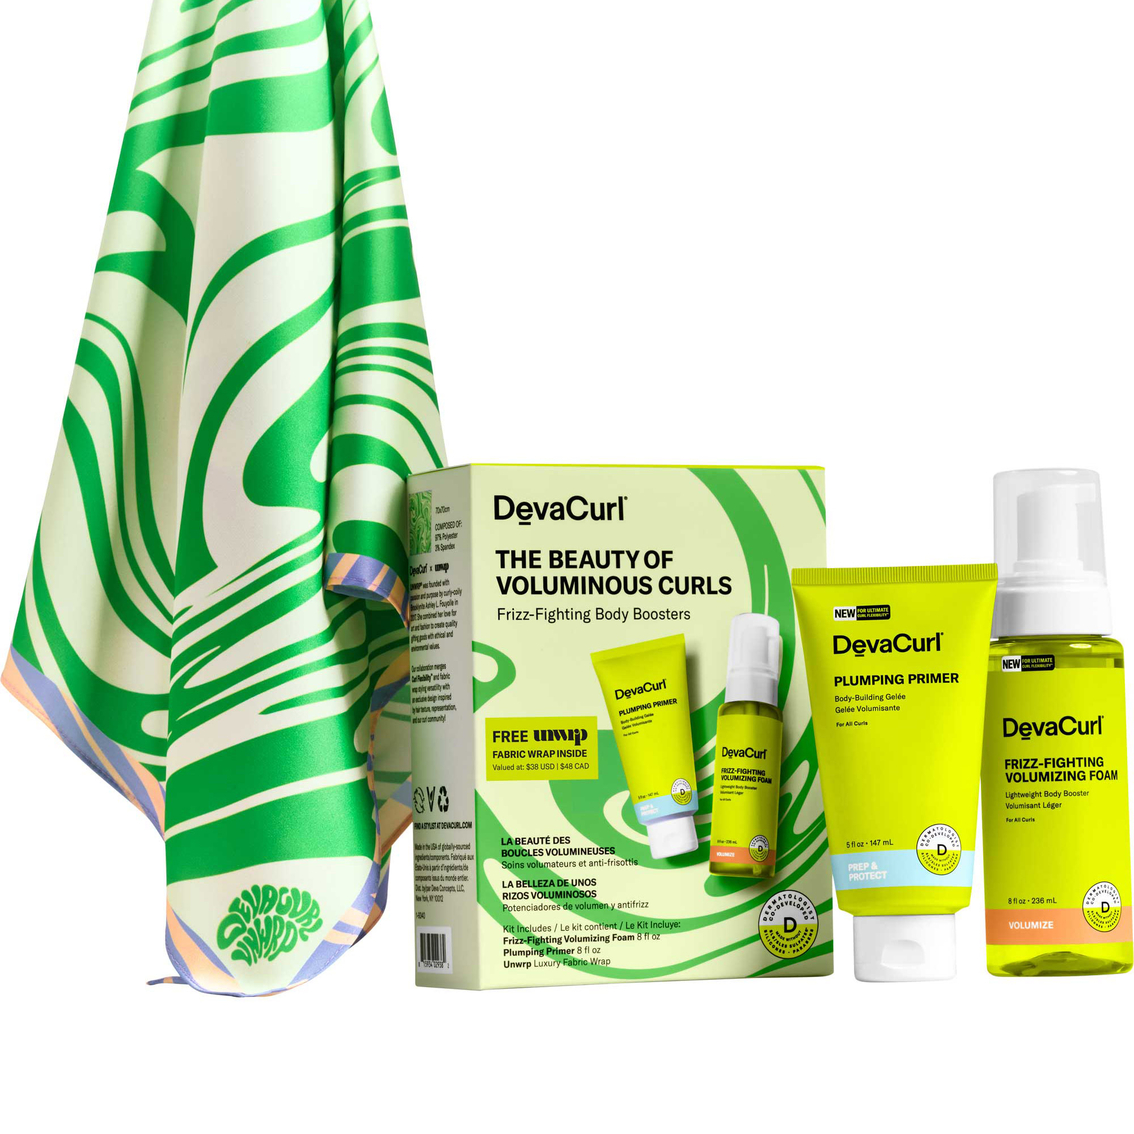 DevaCurl The Beauty of Voluminous Curls Frizz-Fighting Body Boosters - Image 2 of 3